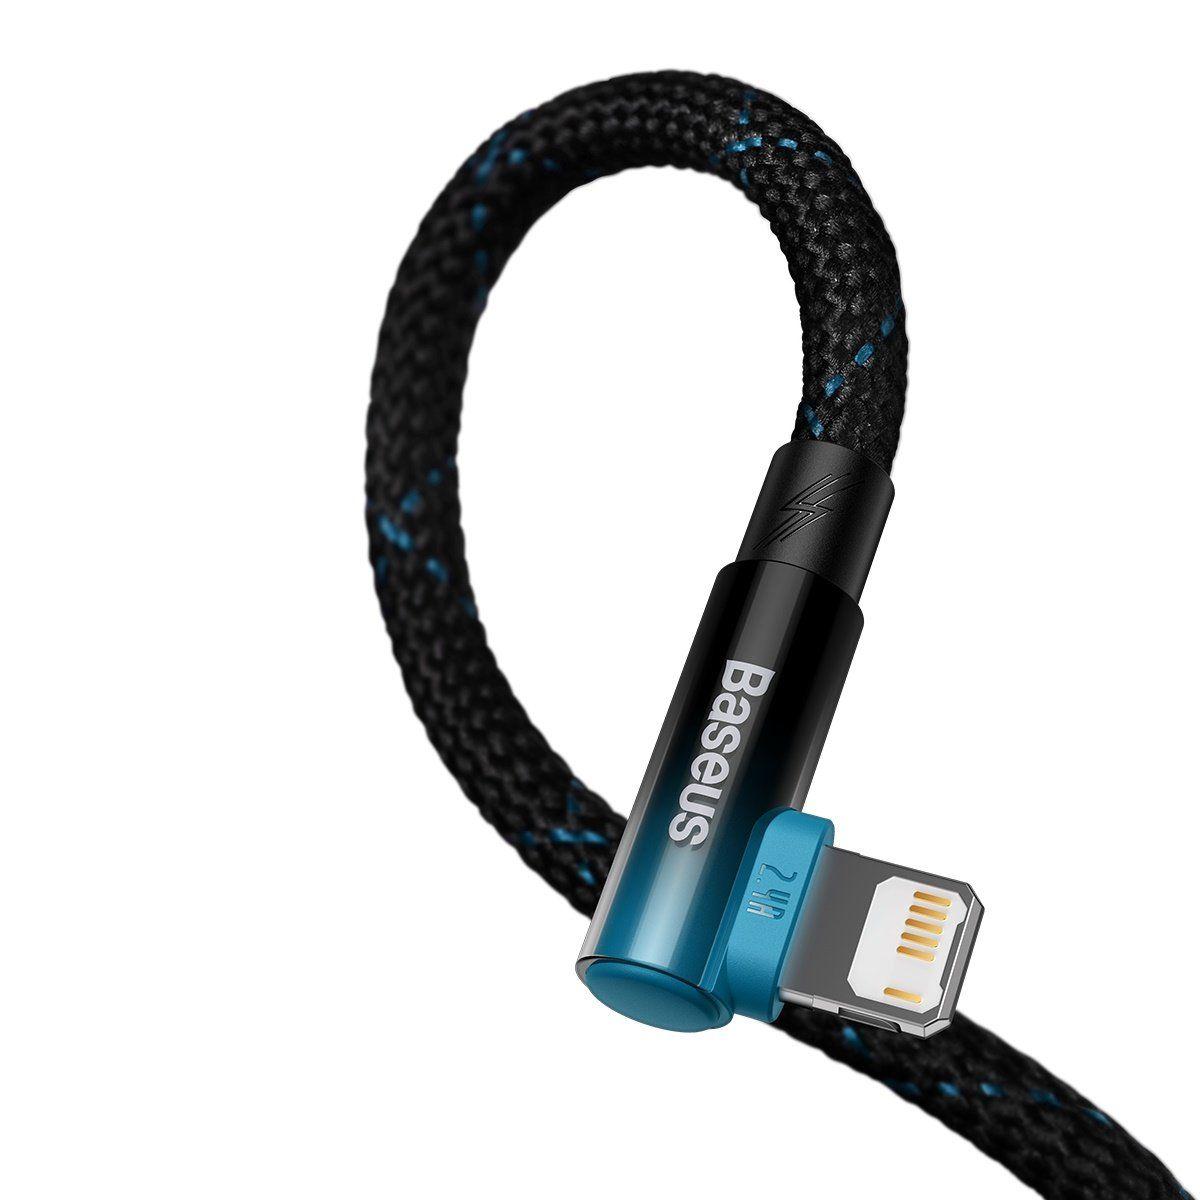 Baseus MVP 2 Elbow-shaped Fast Charging Data Cable USB to iP 2.4A 1m Black+Blue